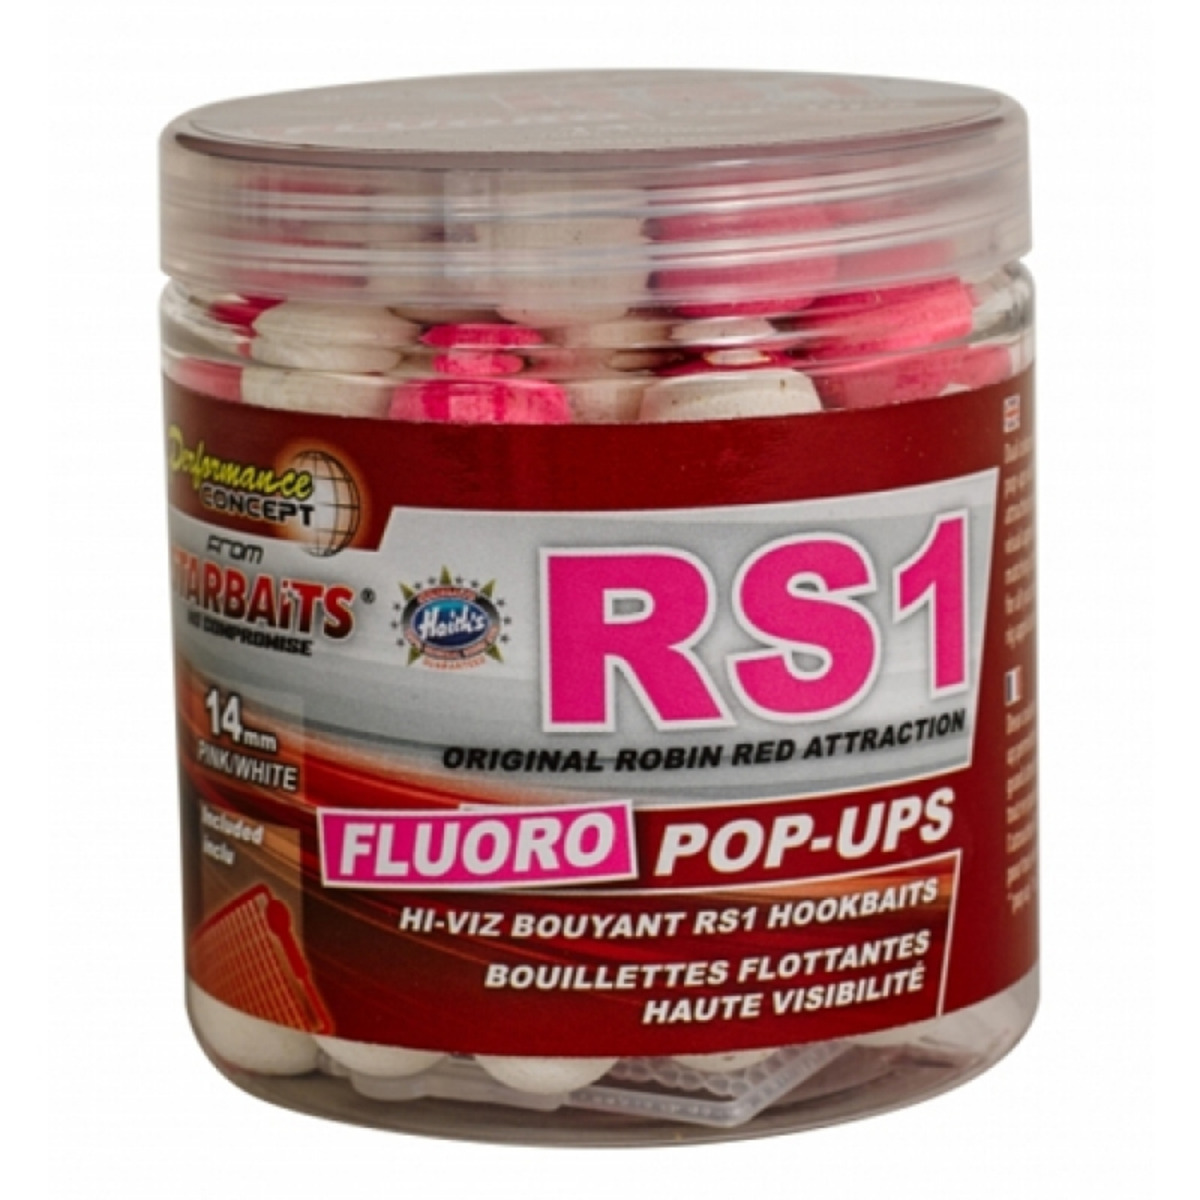 Starbaits Concept Fluo Pop Ups Rs1 - 14 mm  - 80 g